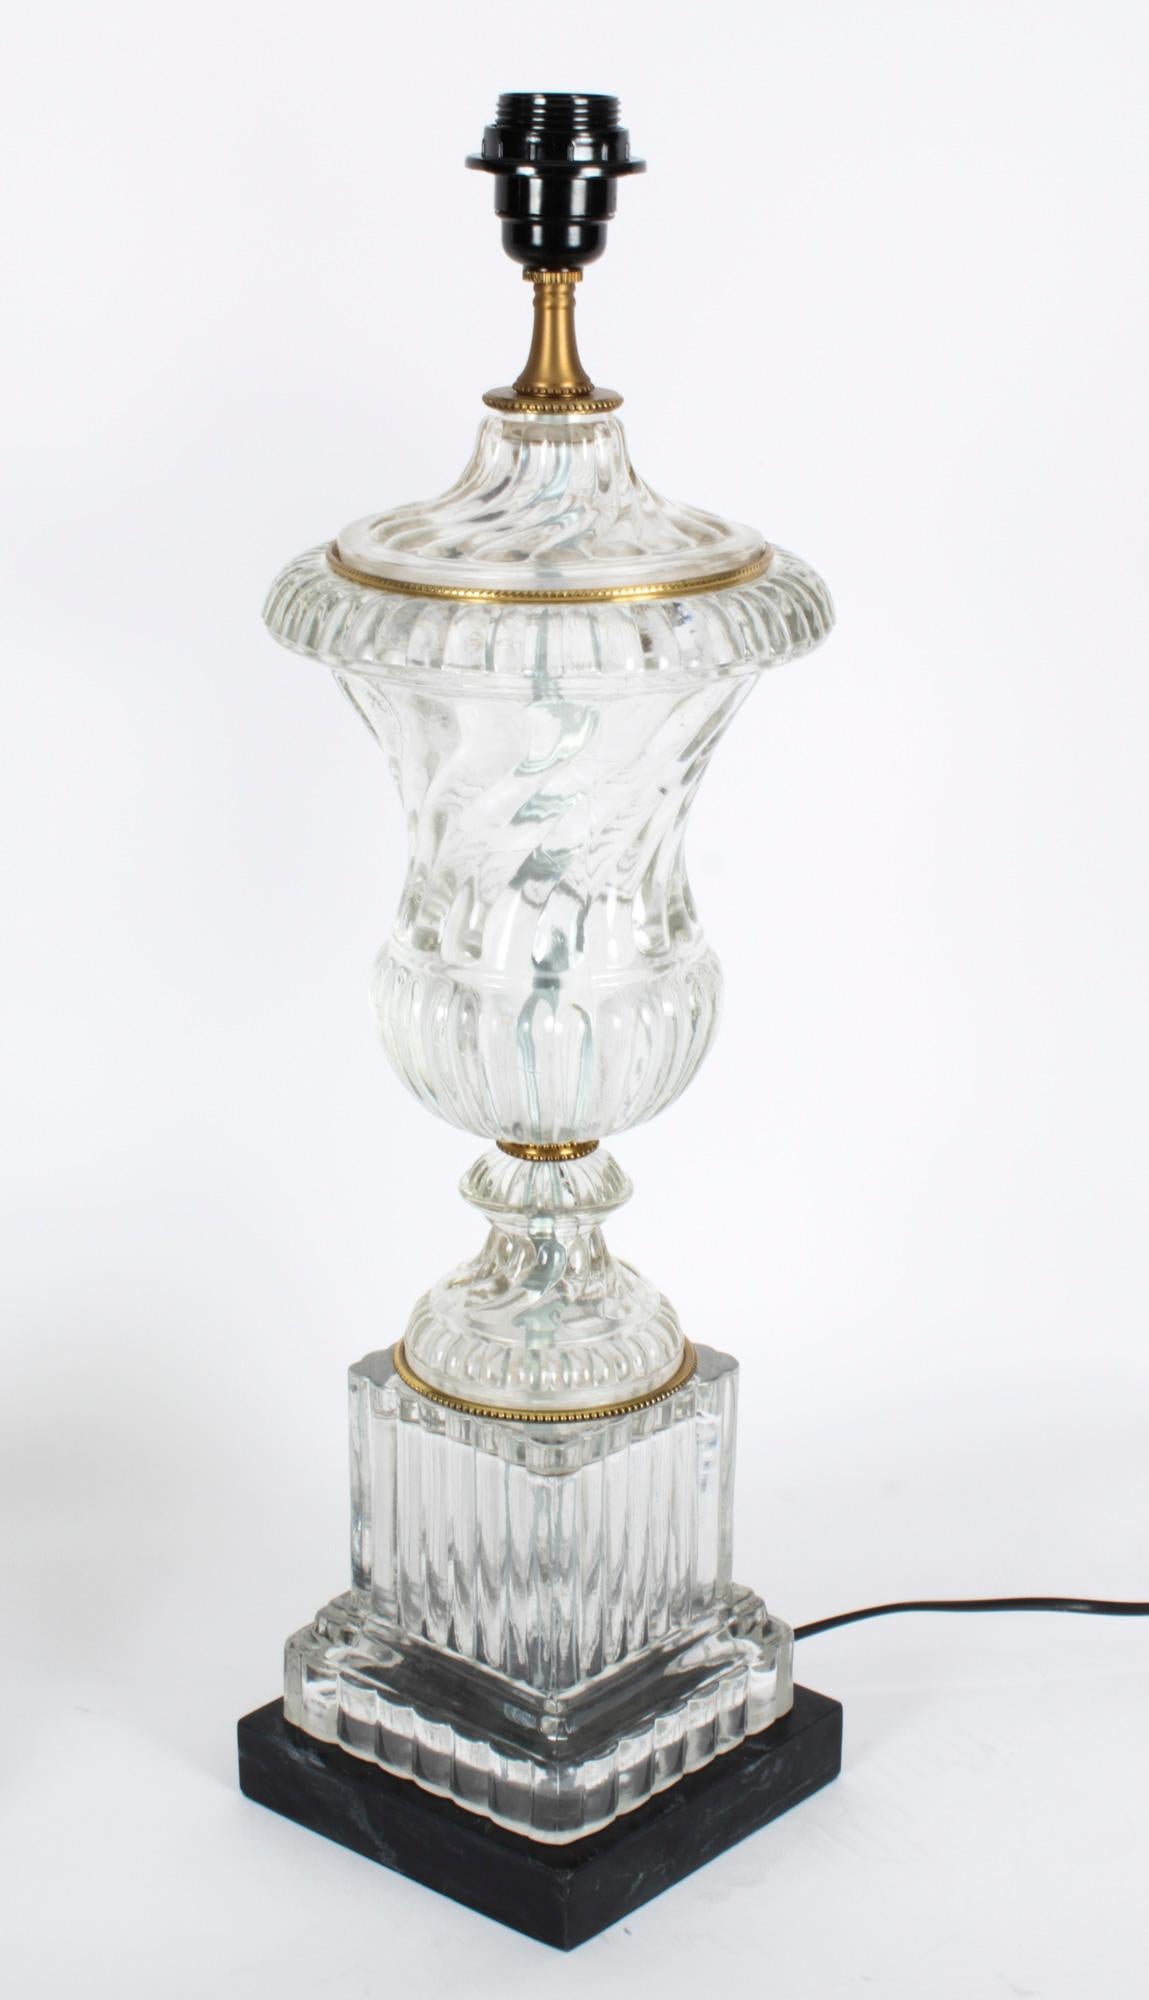 This is an elegant pair of vintage French ormolu and glass table lamps, late 20th century in date.

These elegant lamps have a sophisticated moulded glass body with splendid ormolu high-lights. The lamps in a classical Athenian urn form, decorated